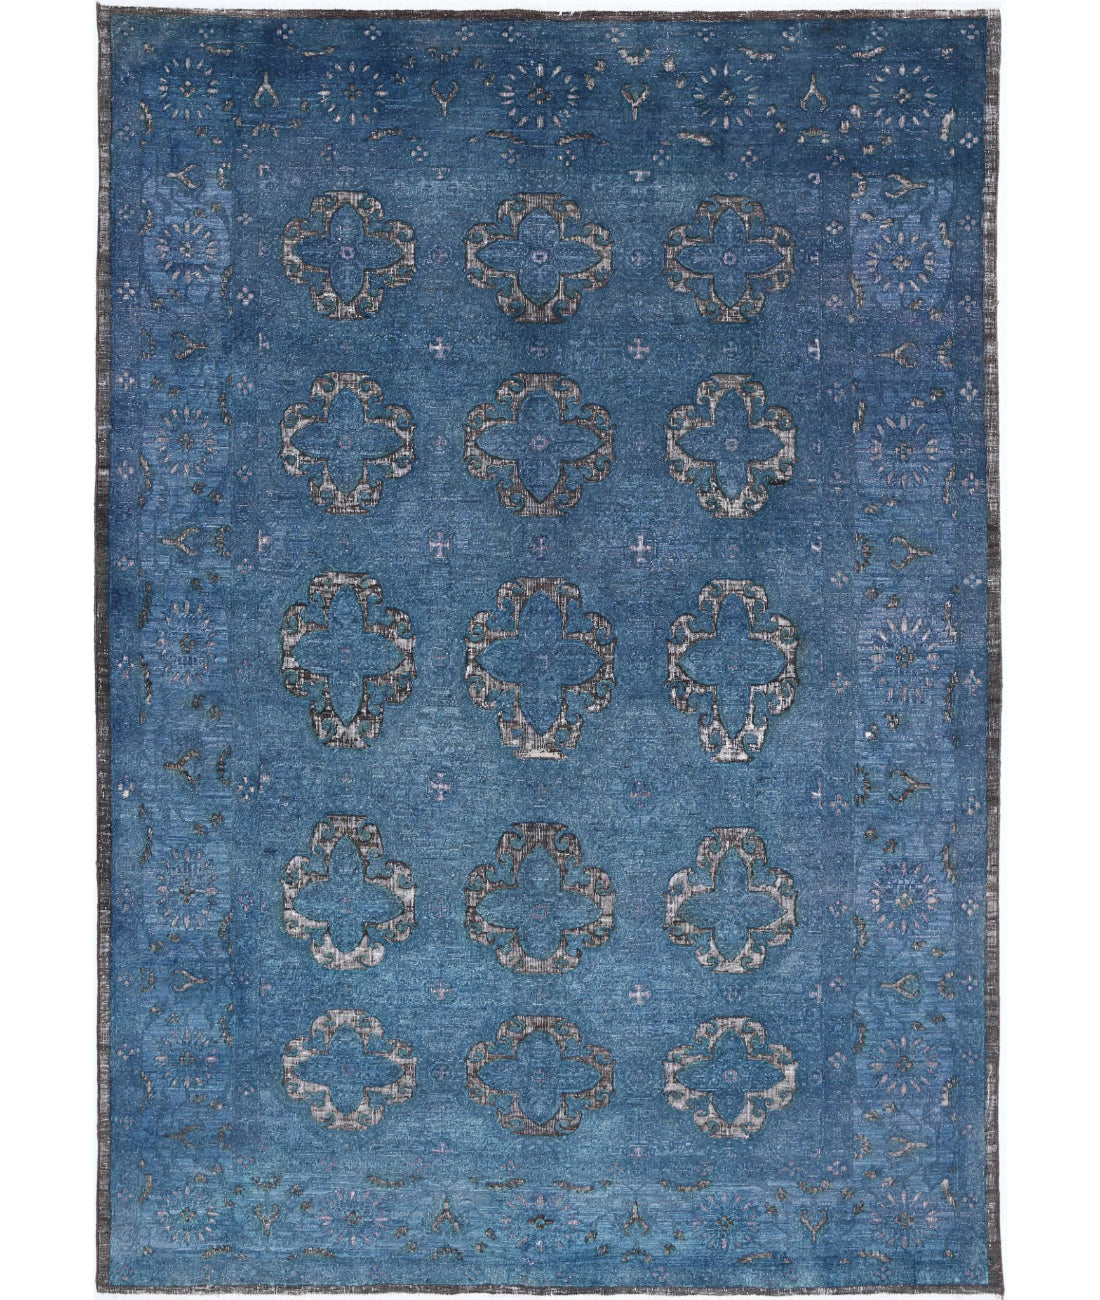 Hand Knotted Onyx Wool Rug - 6'2'' x 8'8'' 6'2'' x 8'8'' (185 X 260) / Blue / Blue